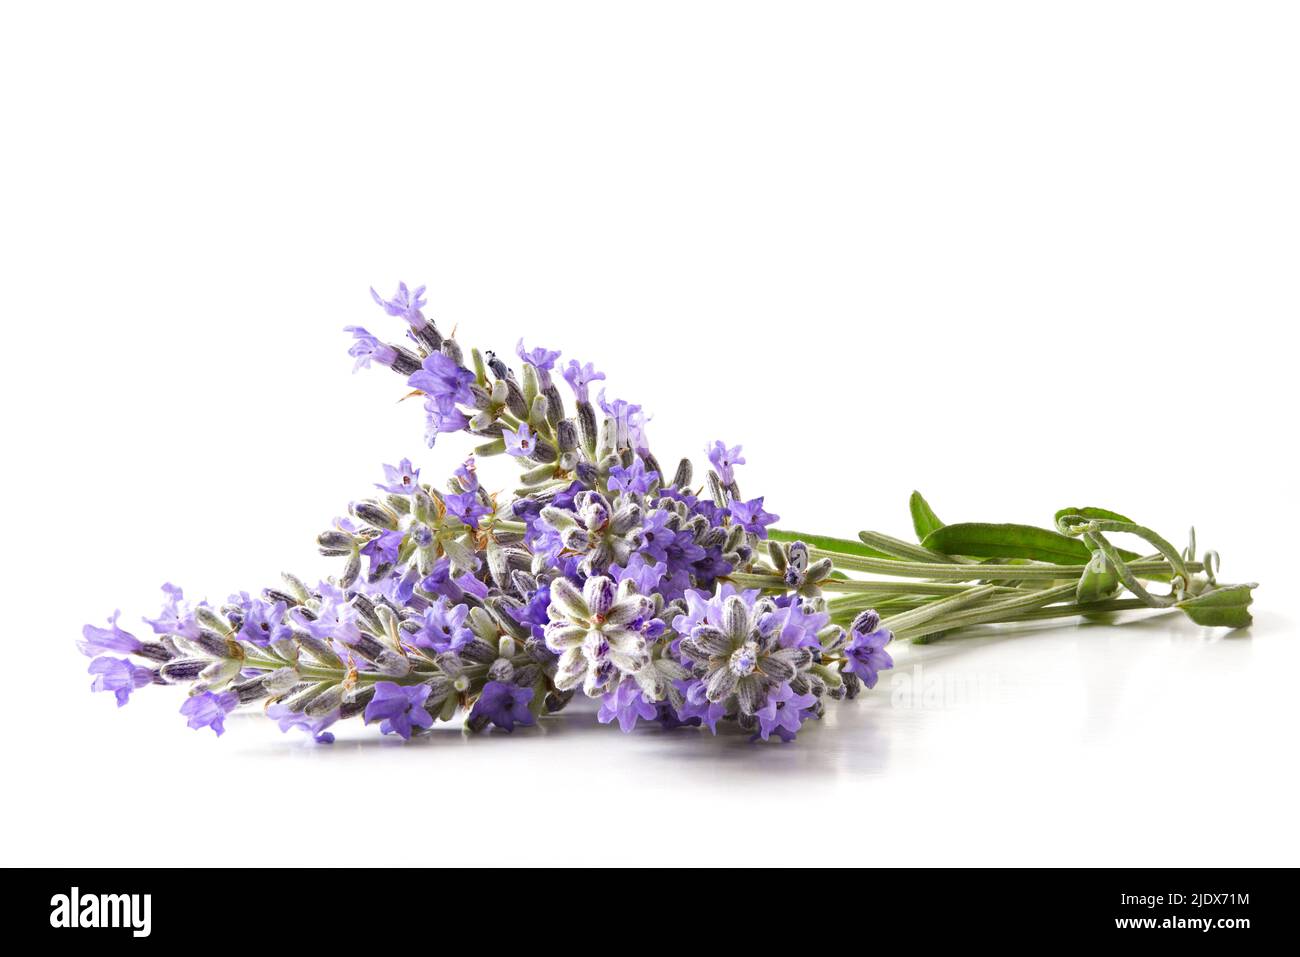 Bouquet of blooming lavender spikes on white table isolated. Front view. Horizontal composition. Stock Photo